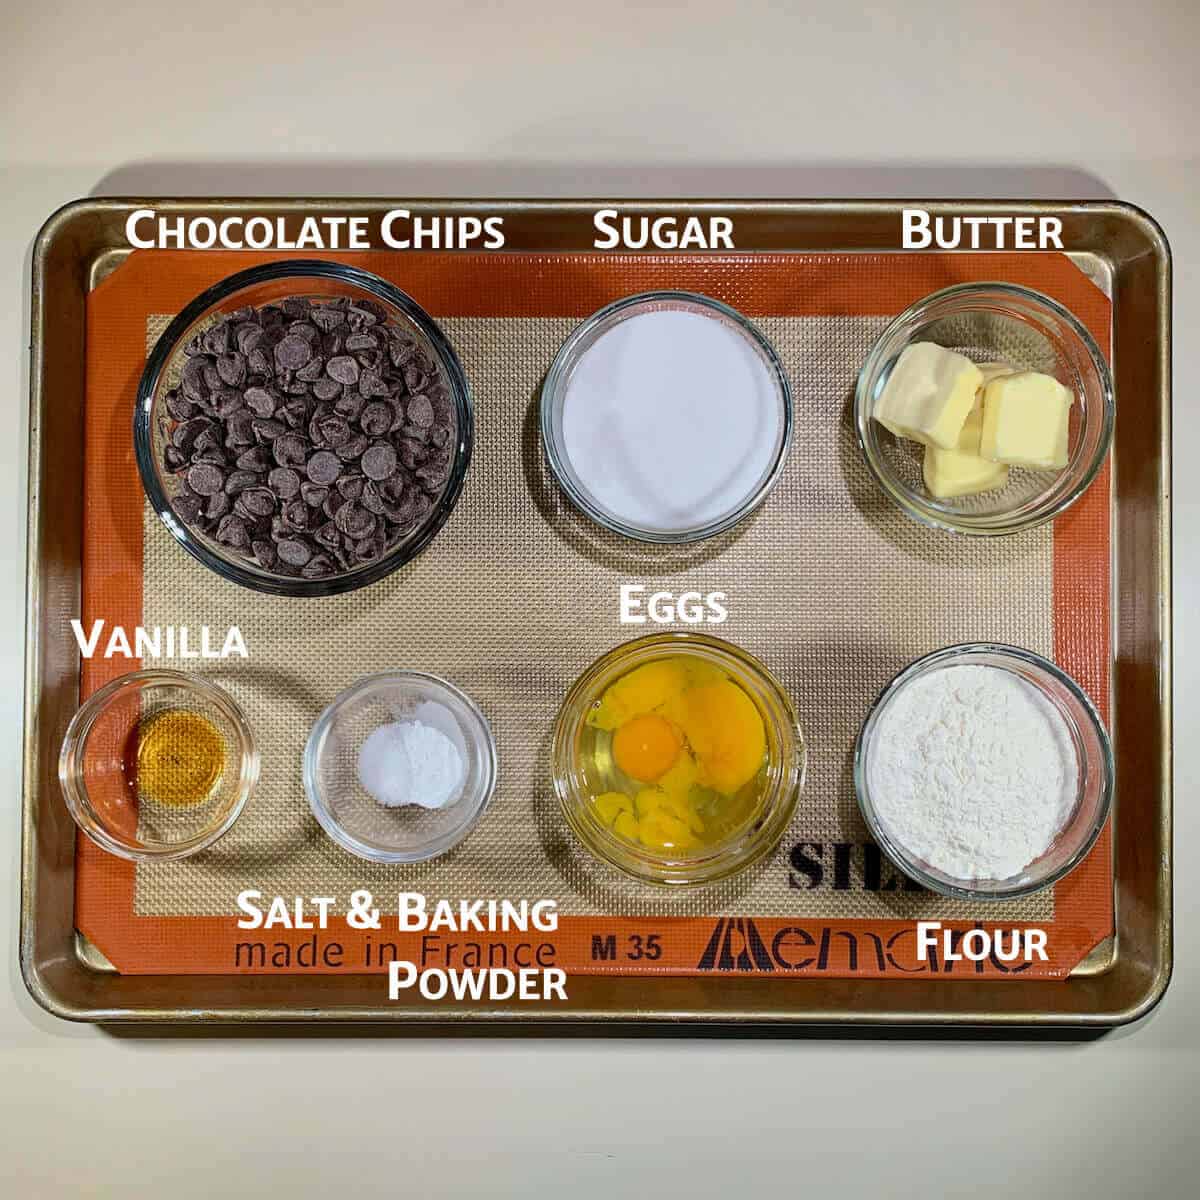 Fudge brownies ingredients portioned into glass bowls on a tray.